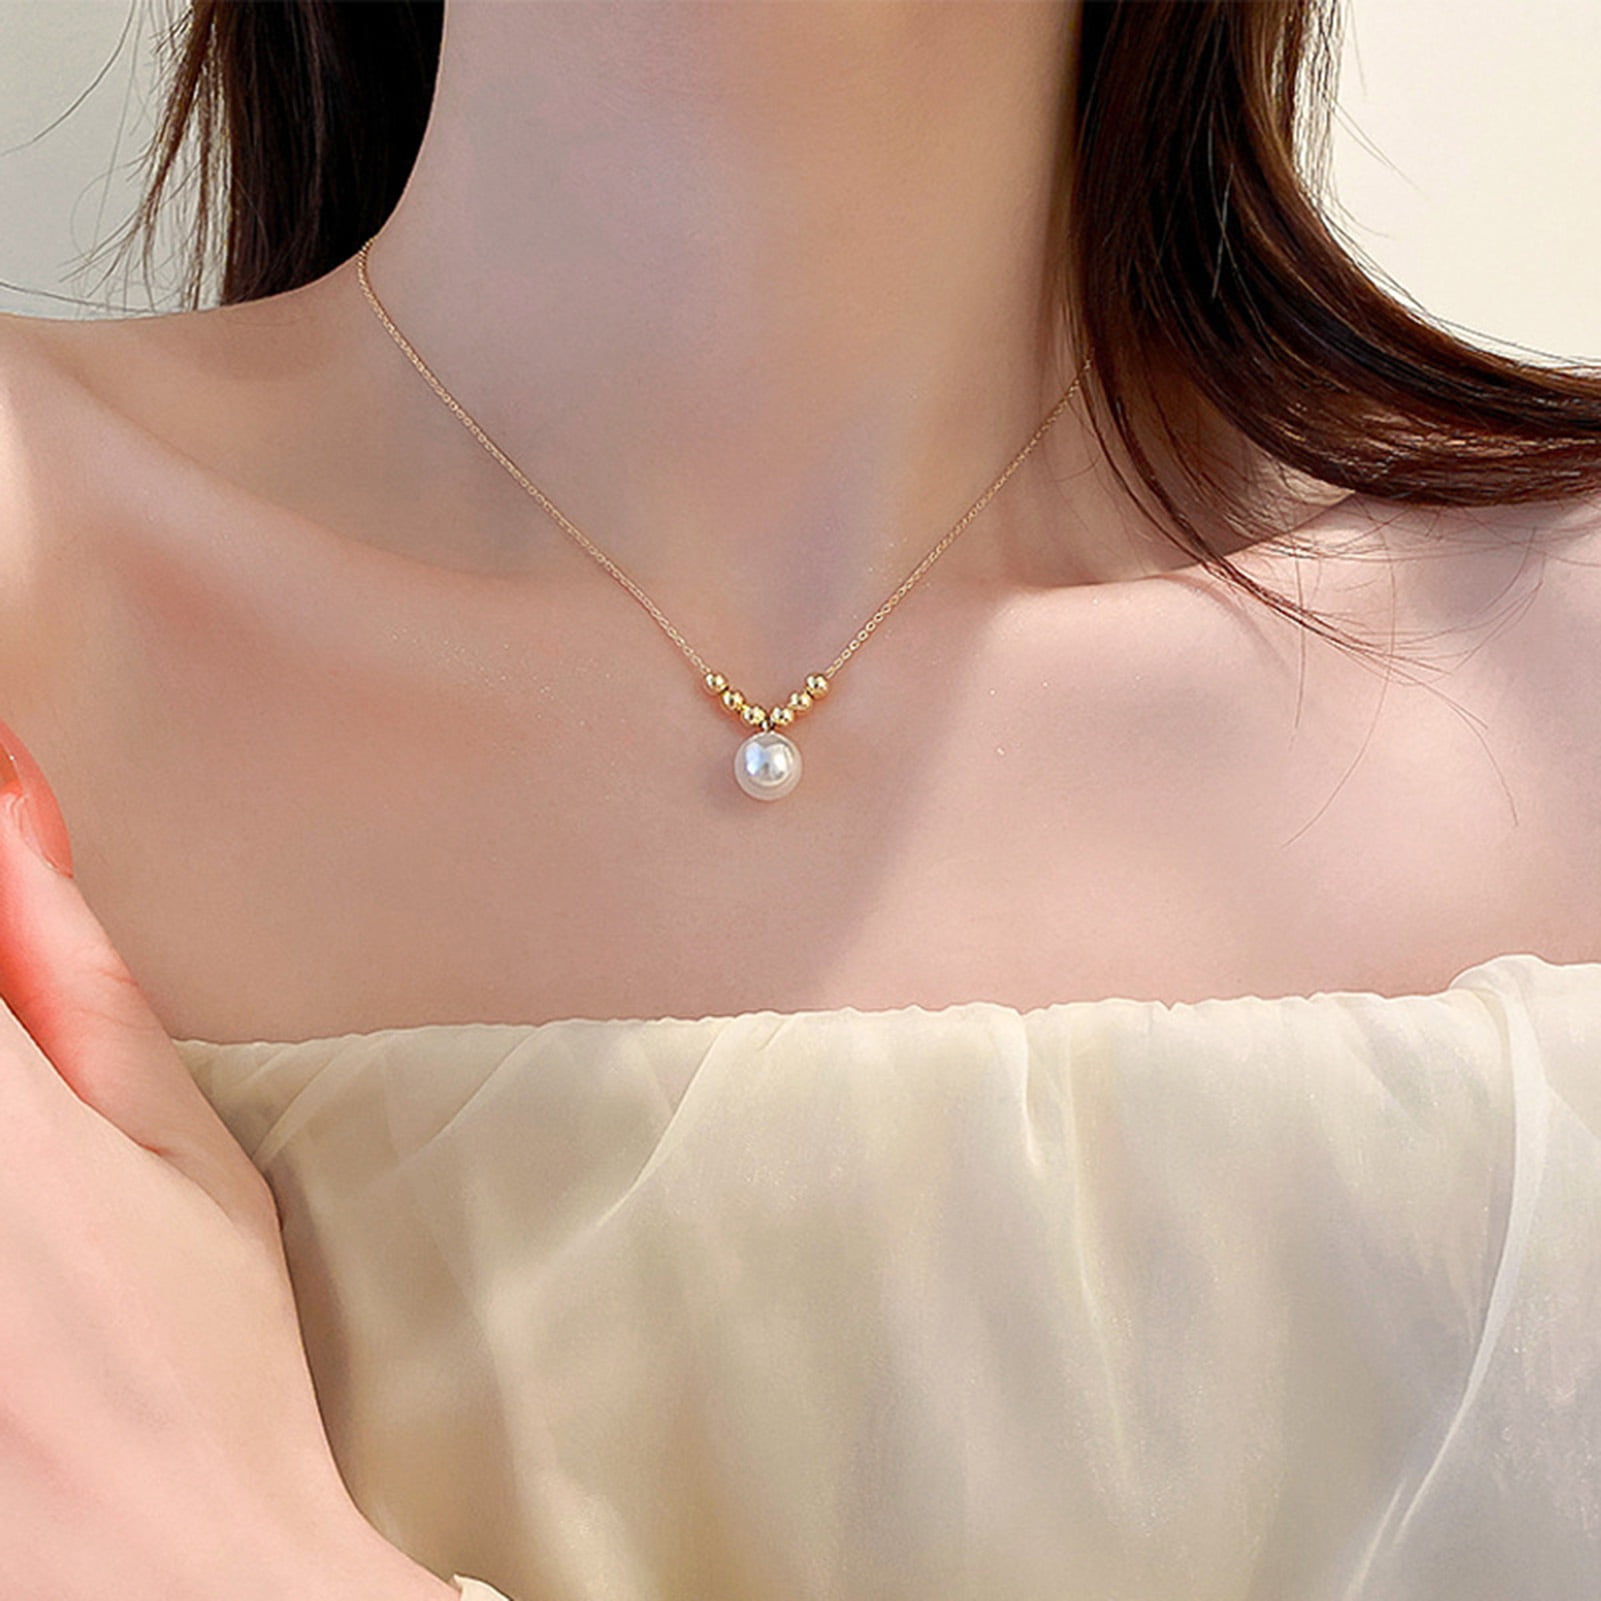 XINHUADSH Women Necklace Multi-Layer Bow Jewelry Electroplating Bright  Luster Necklace Jewelry Gifts